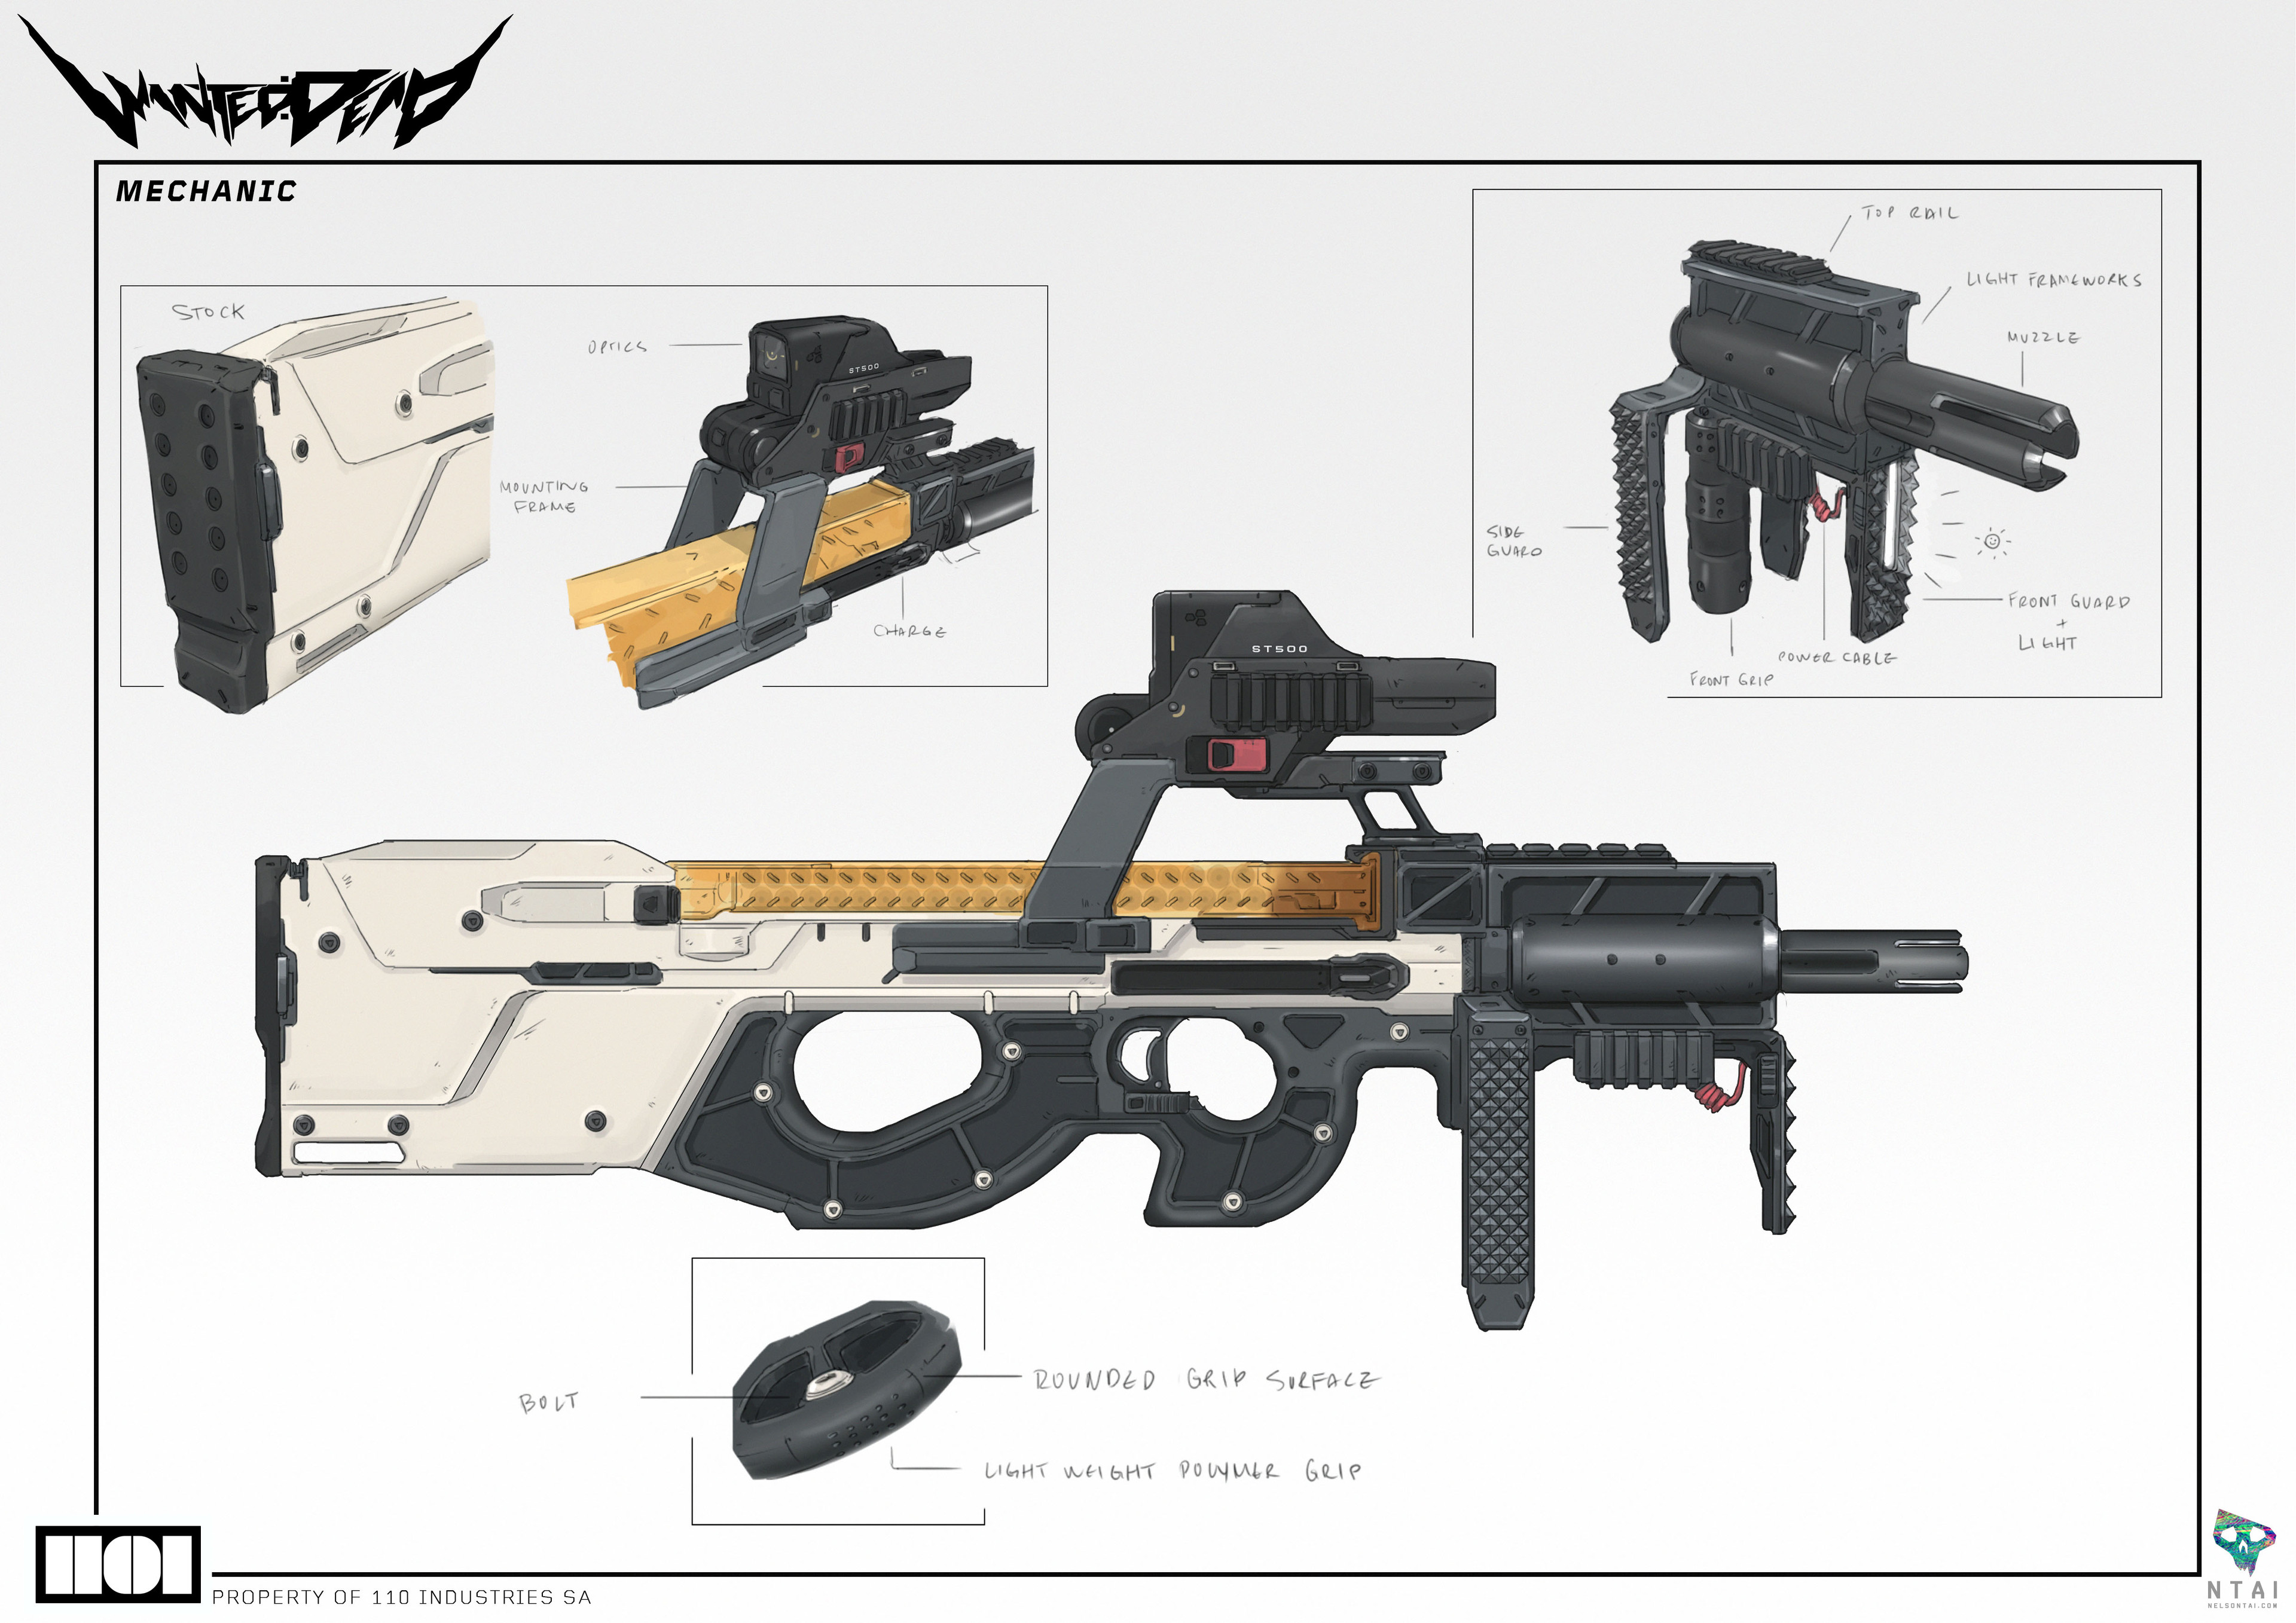 Weapon - Mechanic. Based on the p90